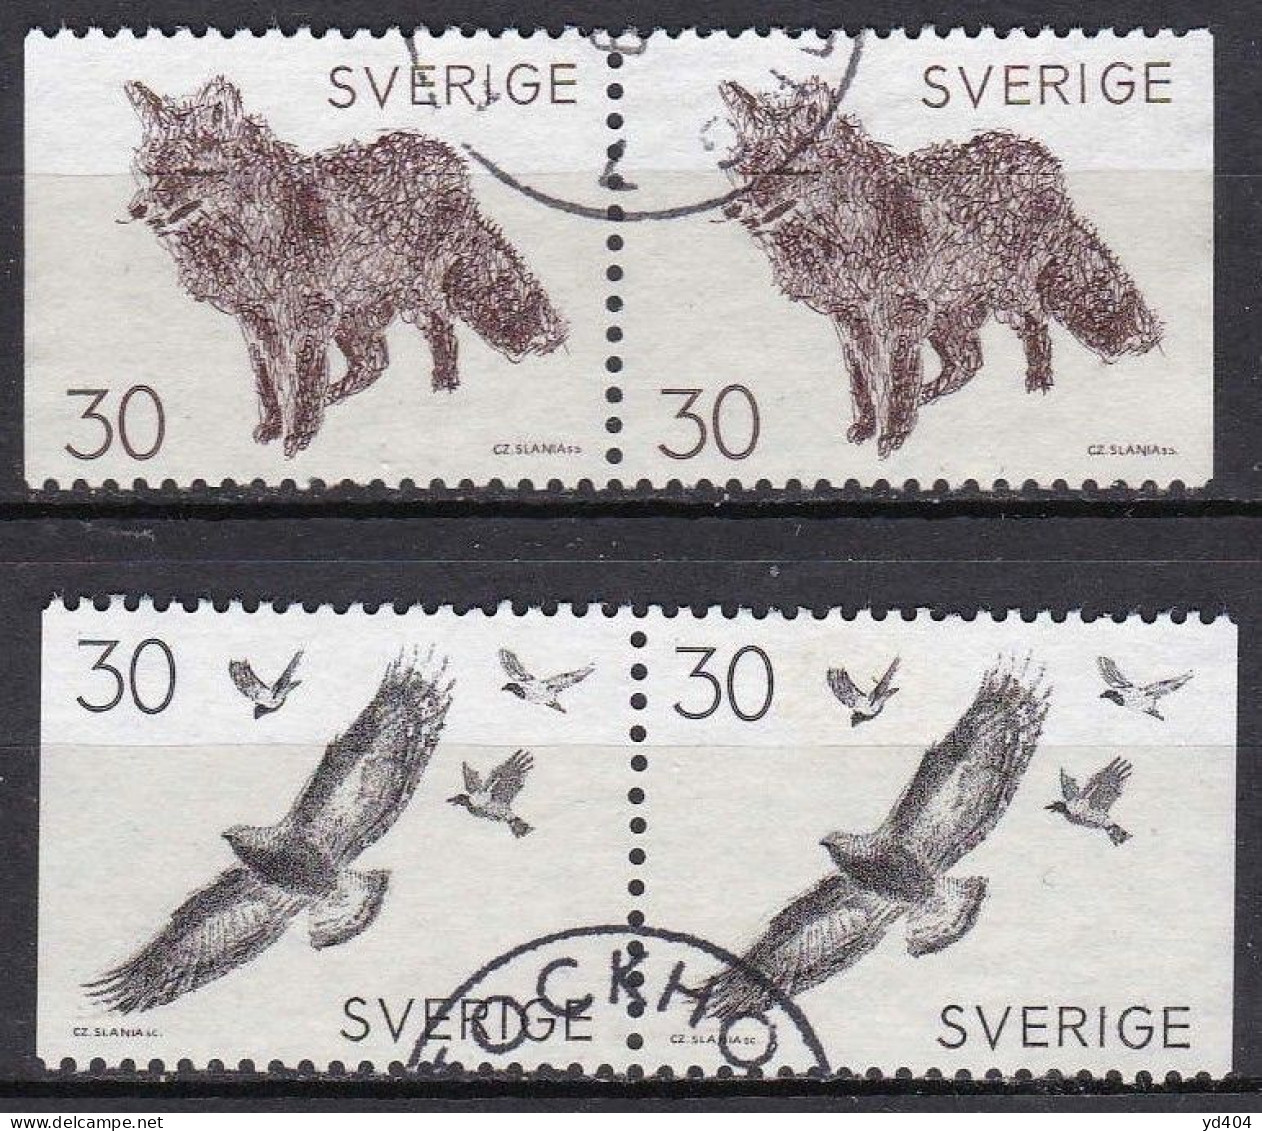 SE247 – SUEDE – SWEDEN – 1968 – SWEDISH FAUNA – Y&T 606/7a USED 4 € - Used Stamps